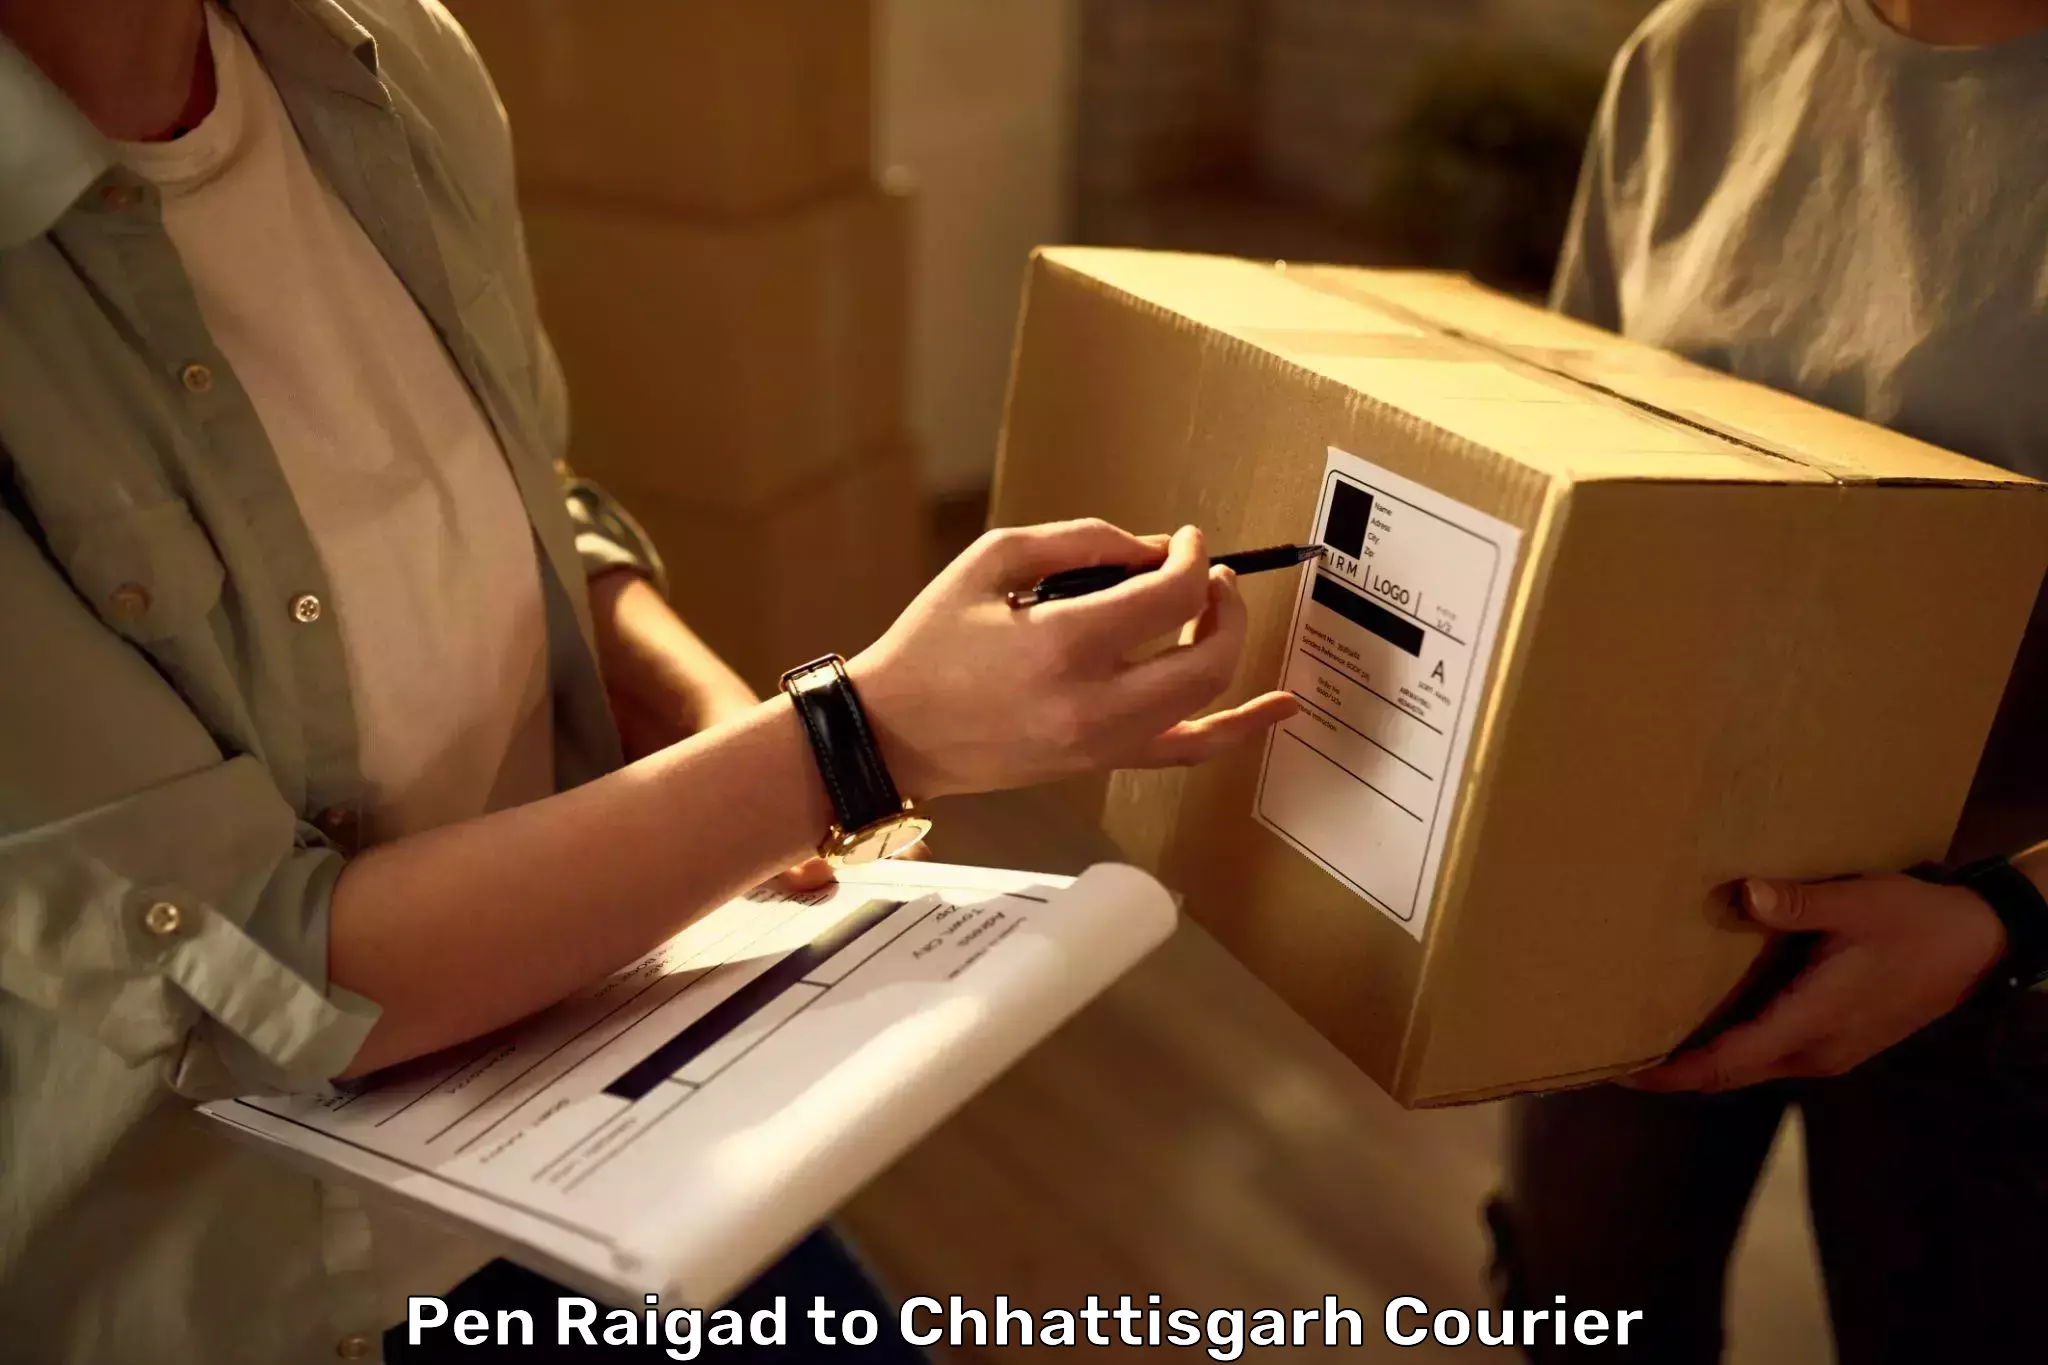 Baggage shipping experience in Pen Raigad to Sirpur